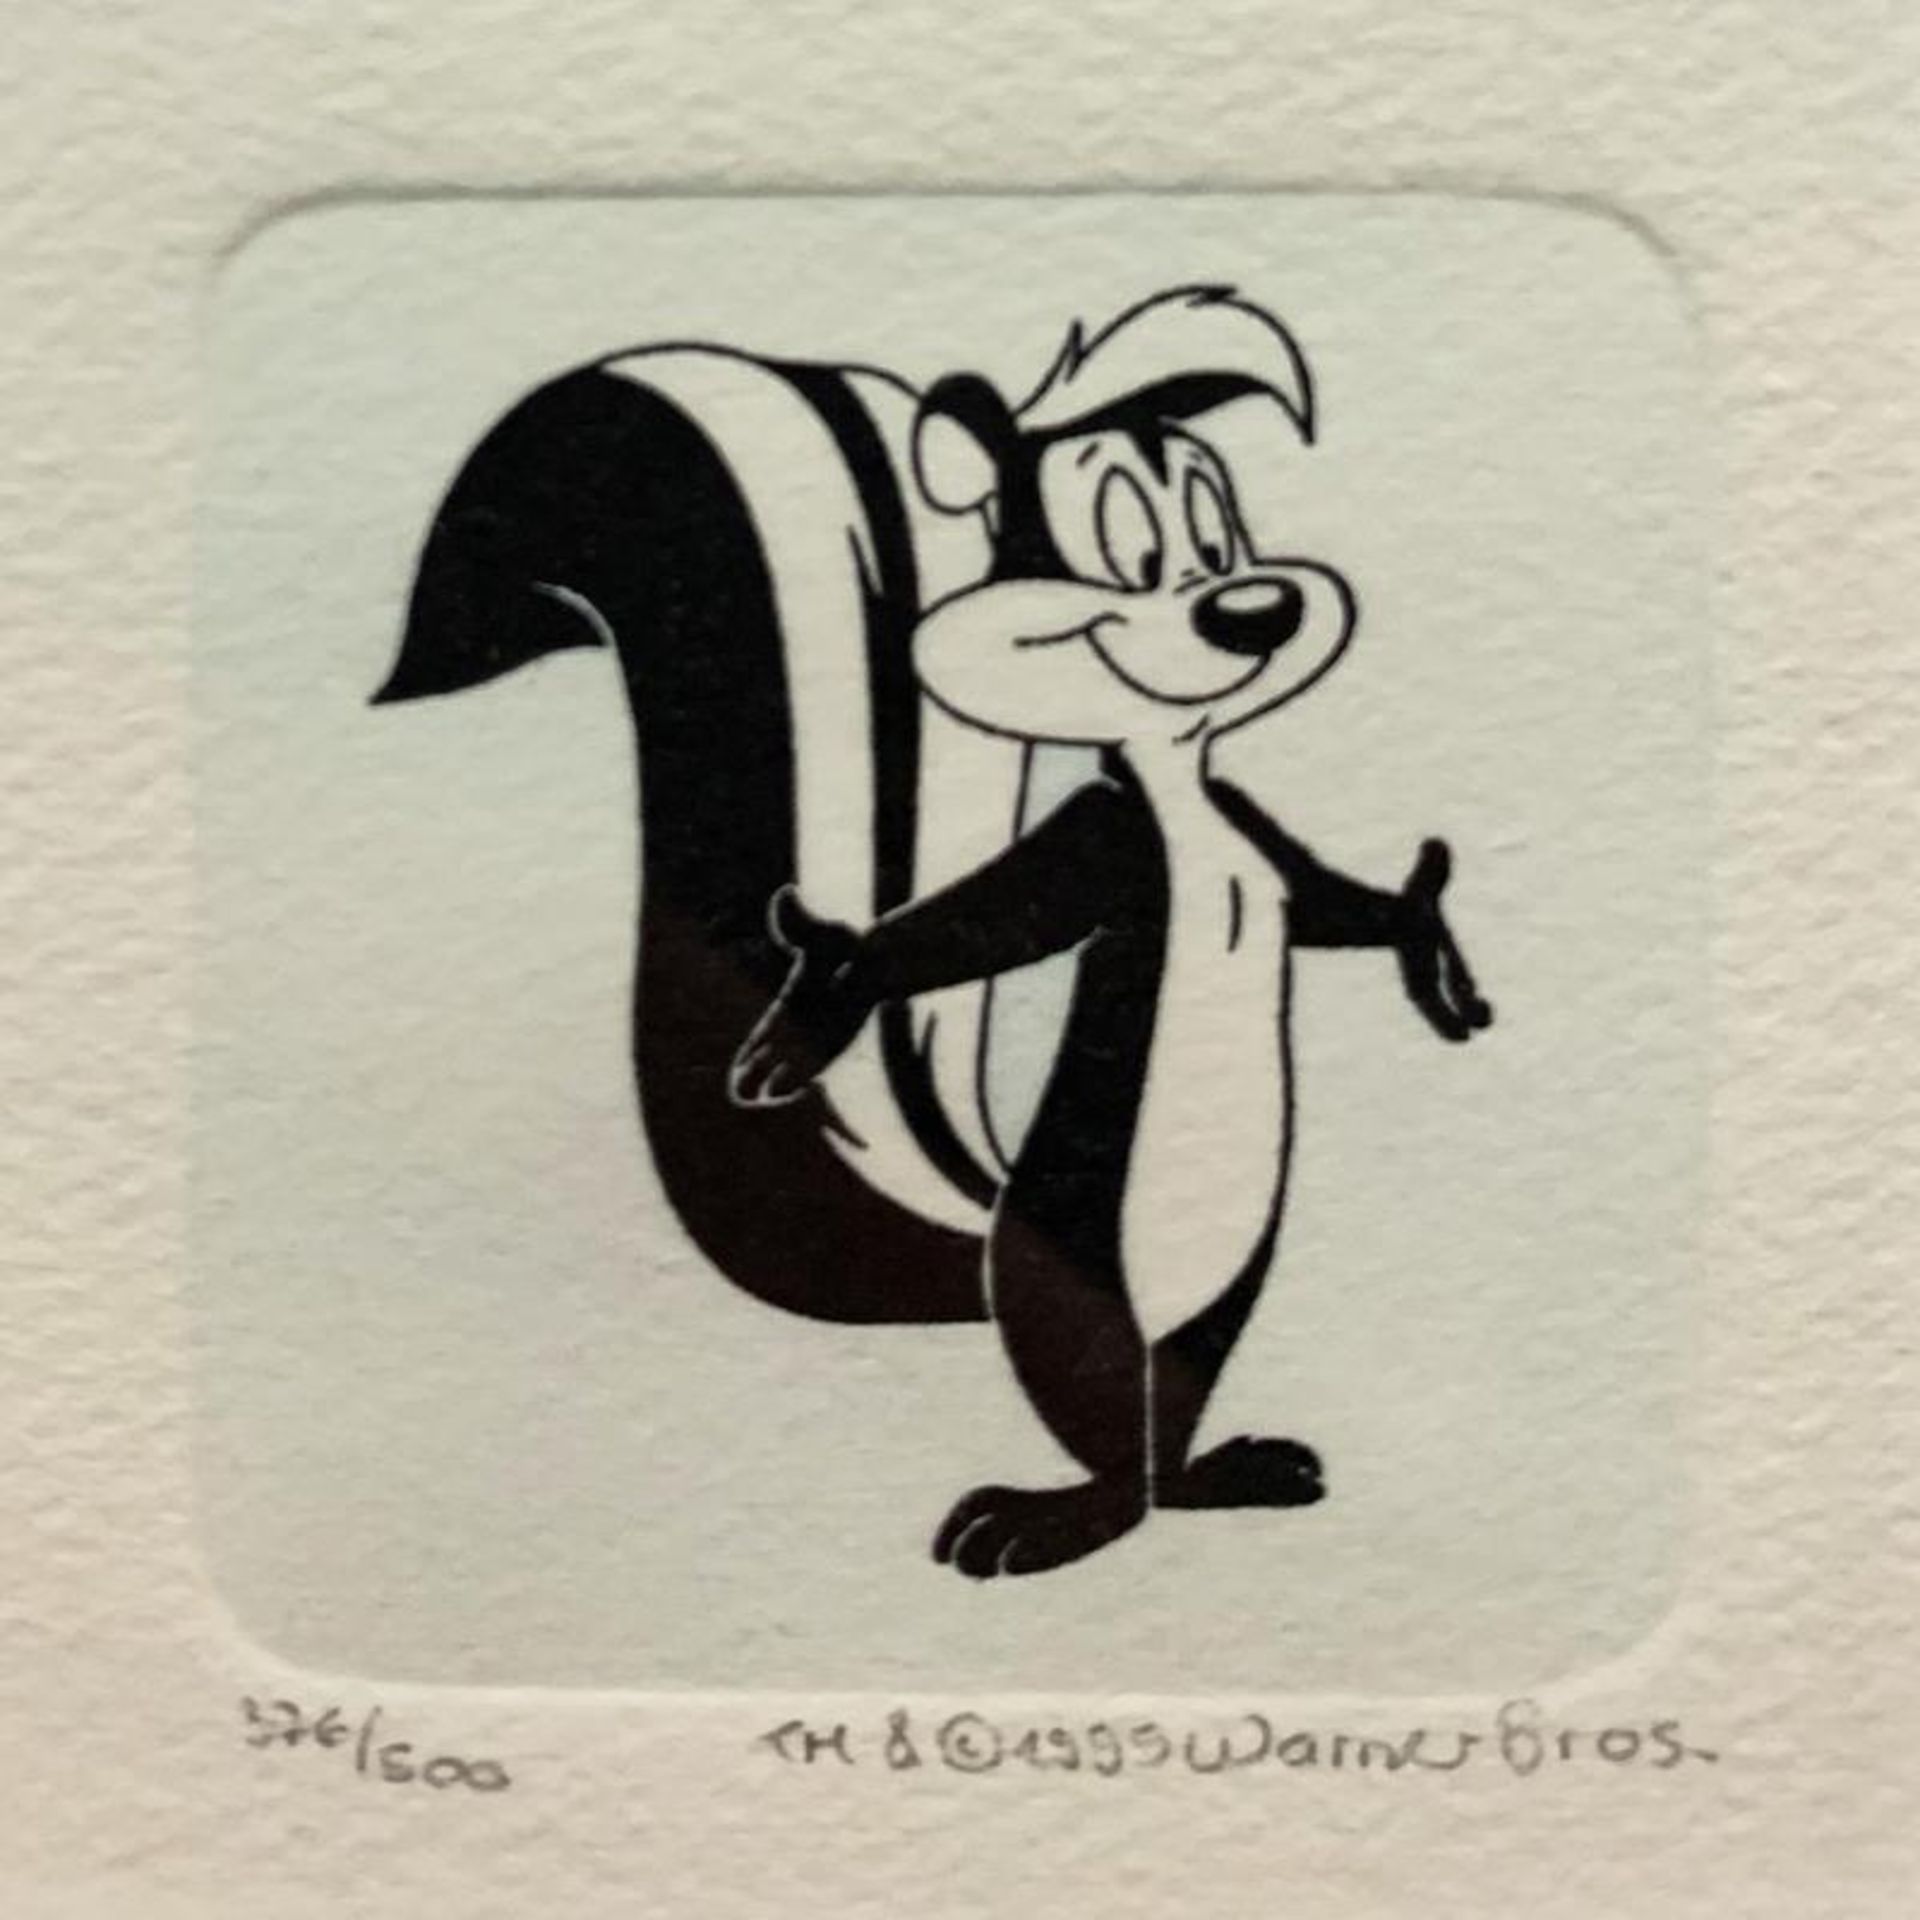 Pepe le Pew by Looney Tunes - Image 2 of 2